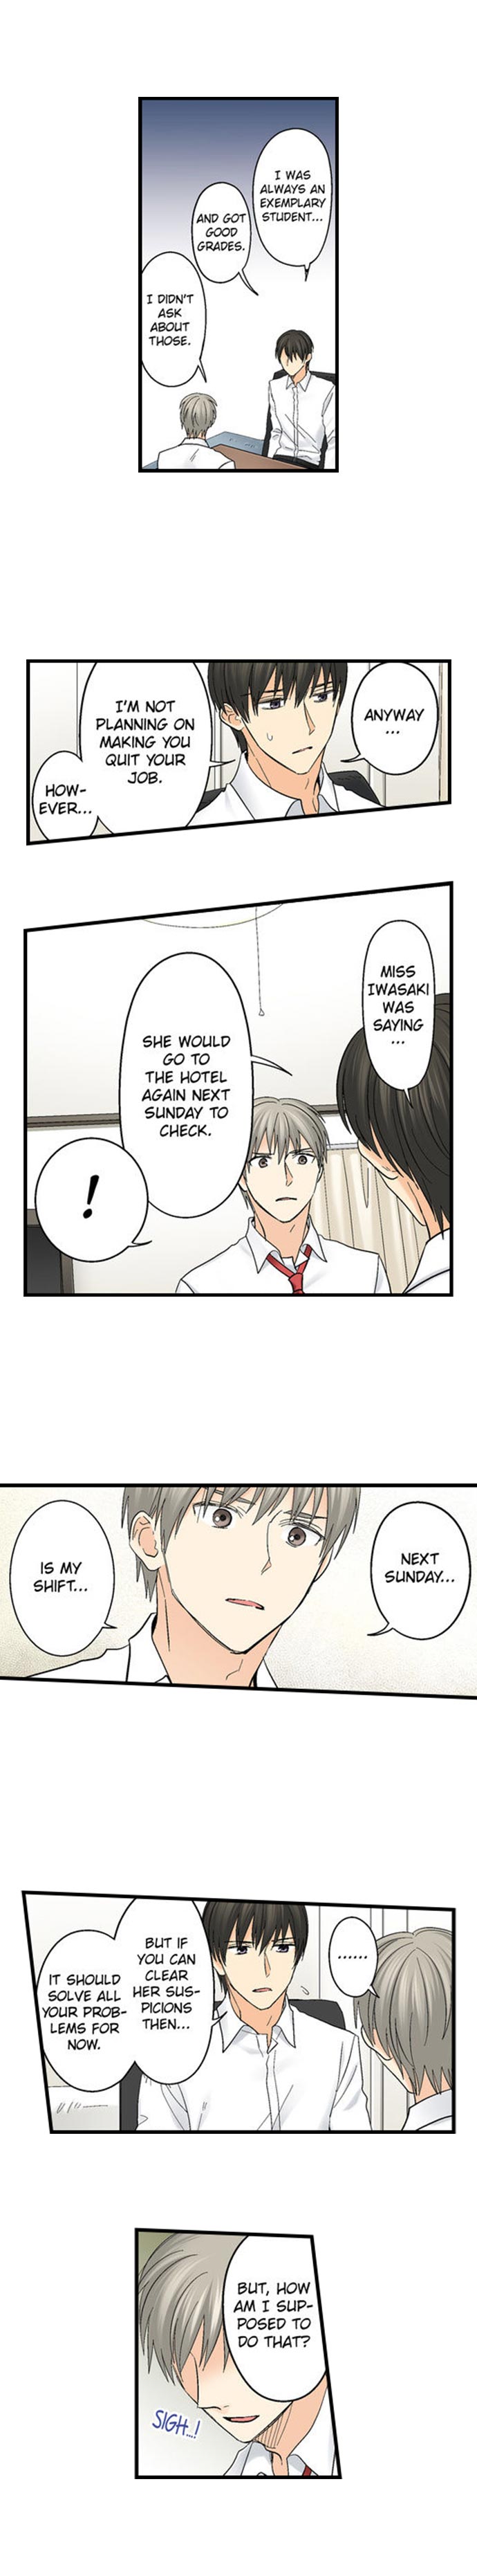 Running a Love Hotel with My Math Teacher - Chapter 88 Page 7